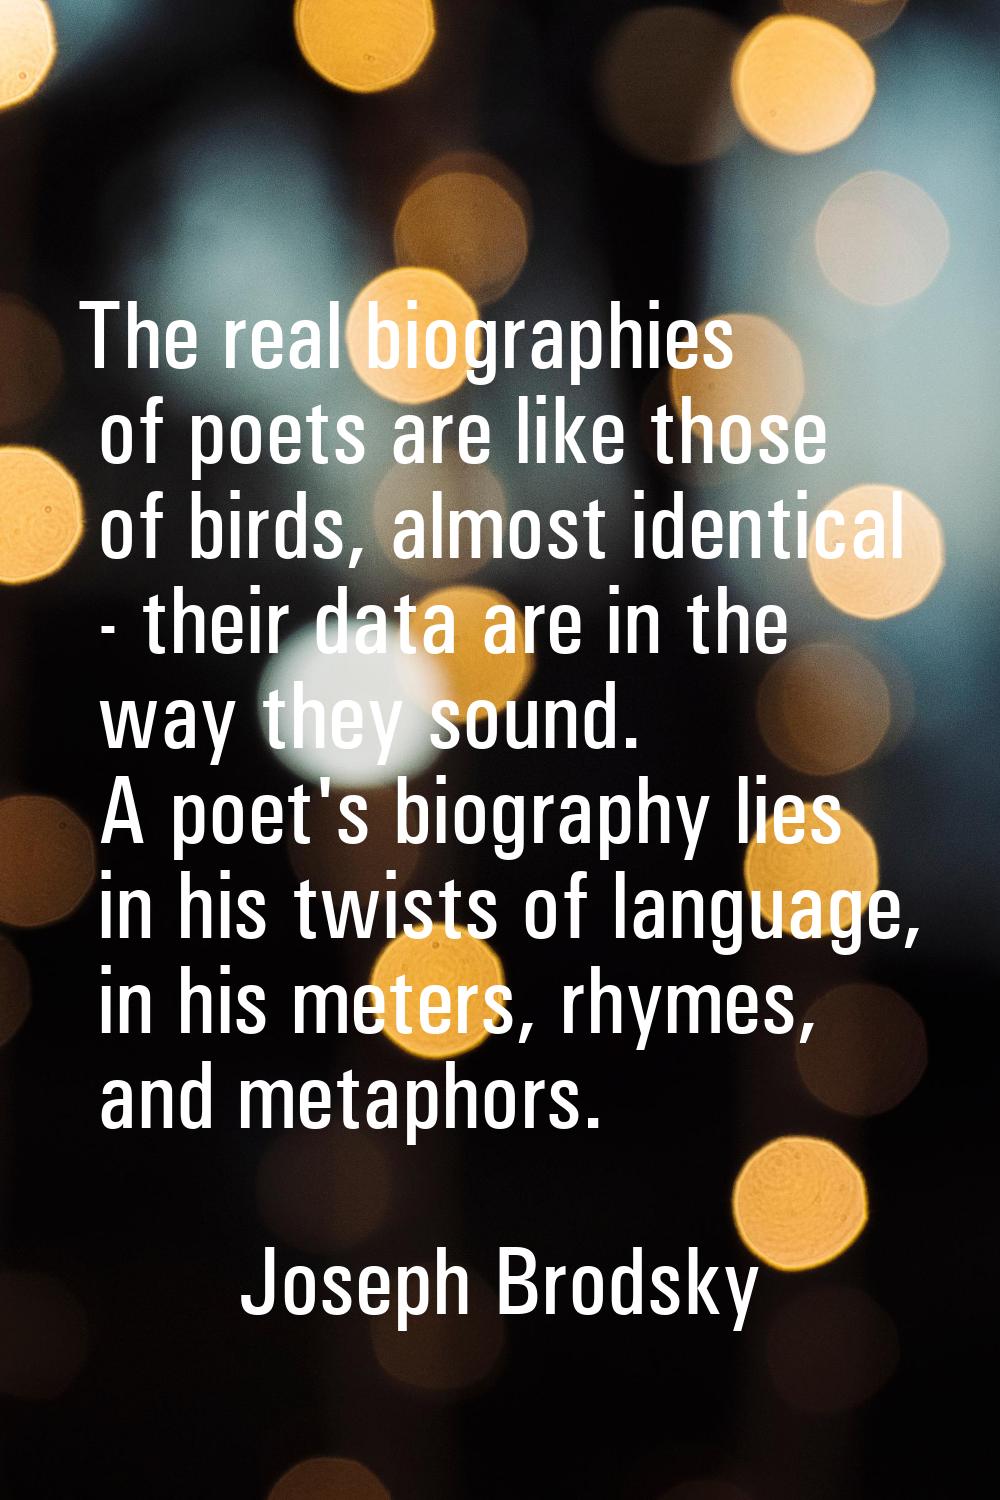 The real biographies of poets are like those of birds, almost identical - their data are in the way